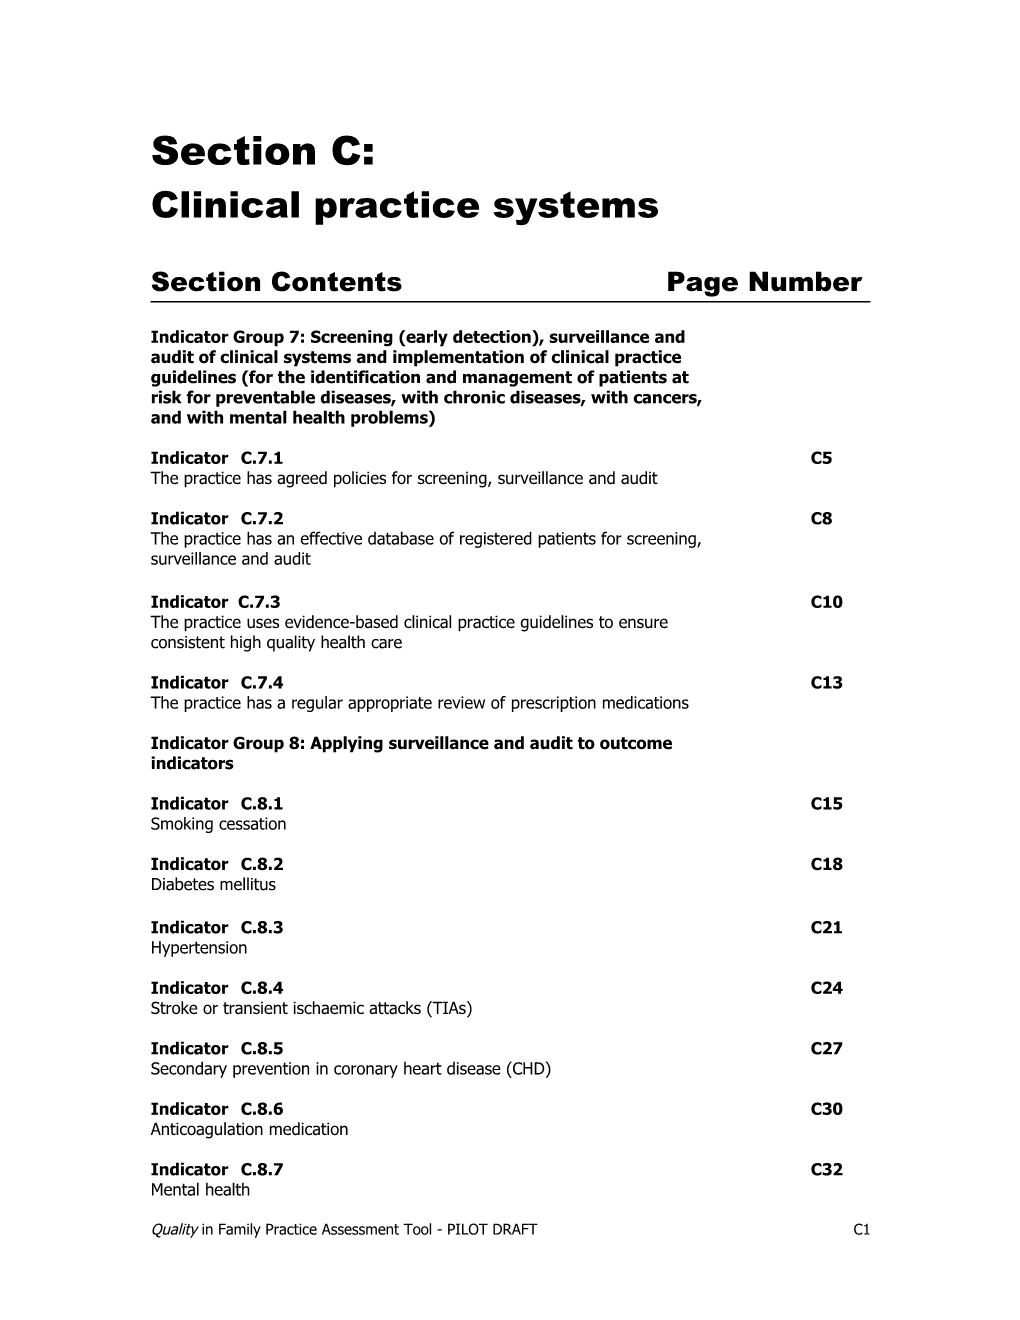 Section C Practice Systems